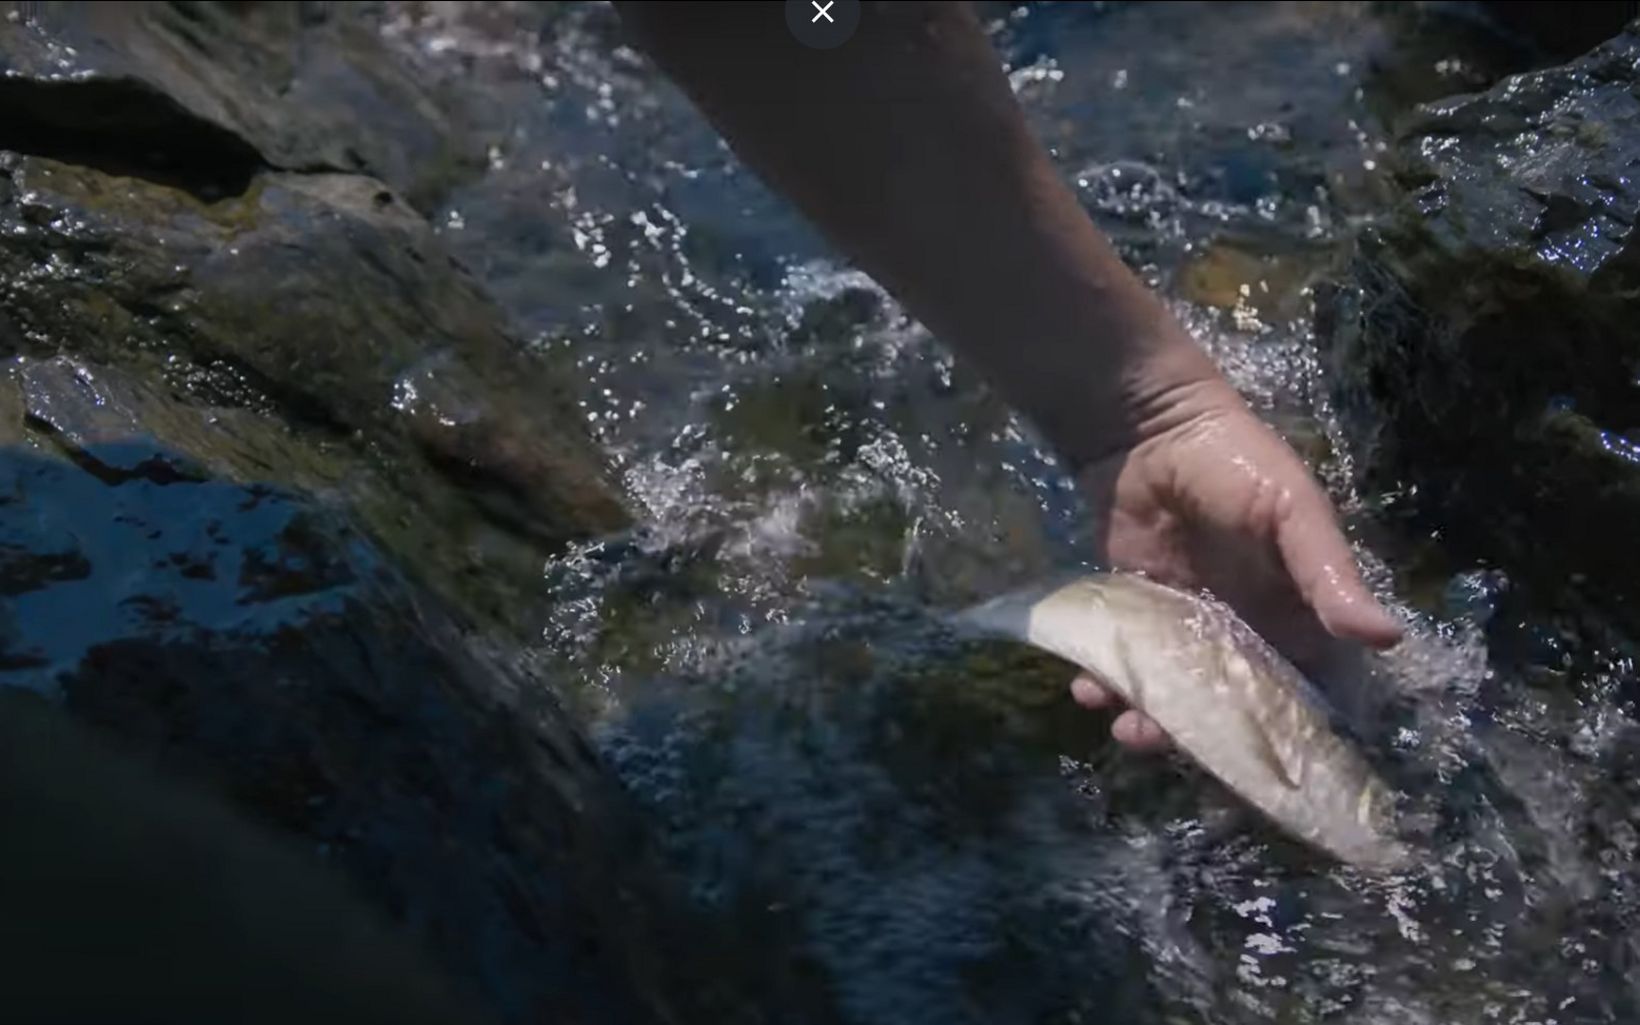 Photo of a man's hands in a stream, releasing a fish.